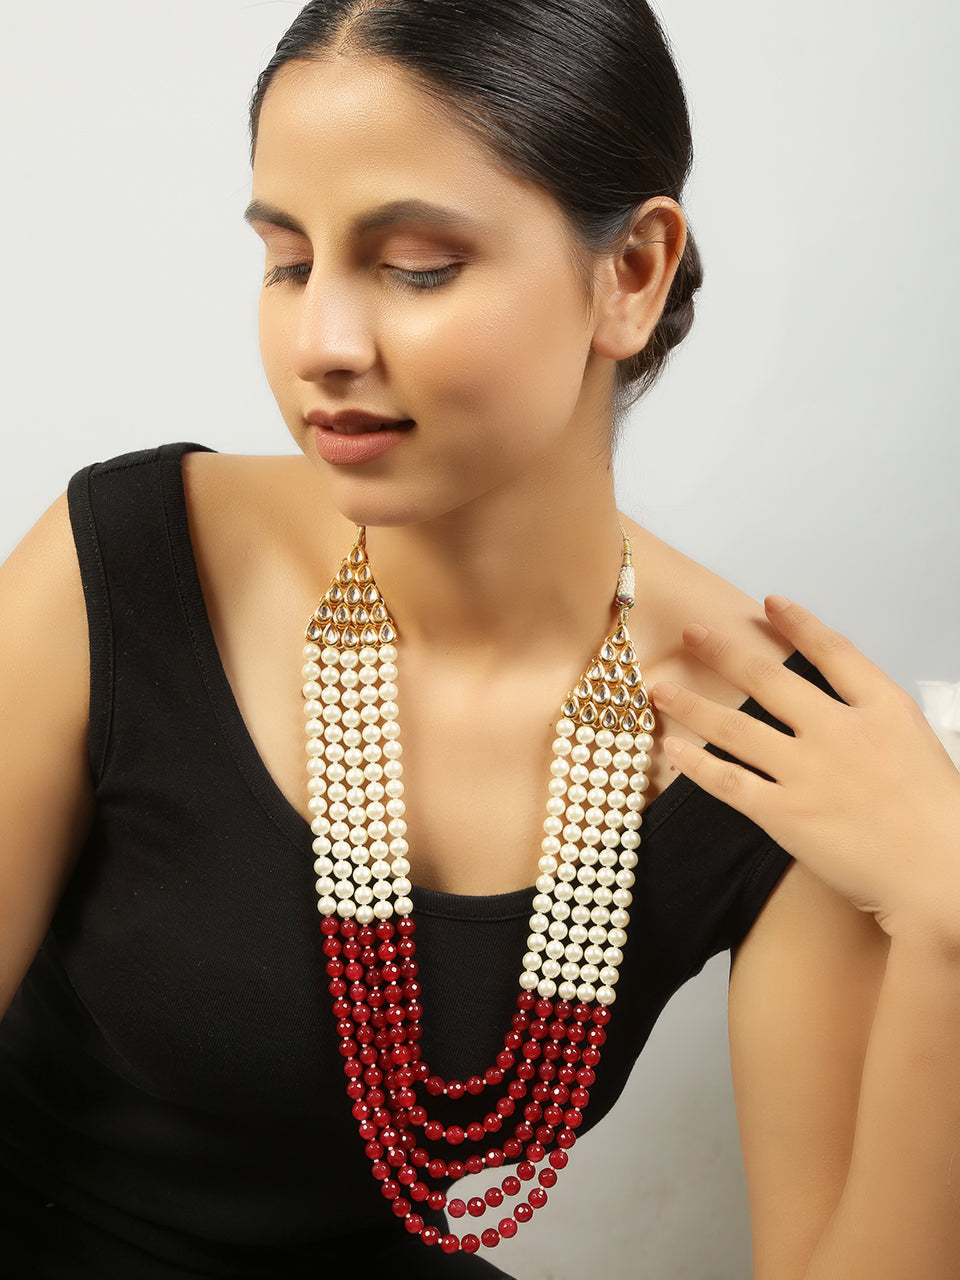 Women's Ruby And White Pearl Layered Necklace - Femizen